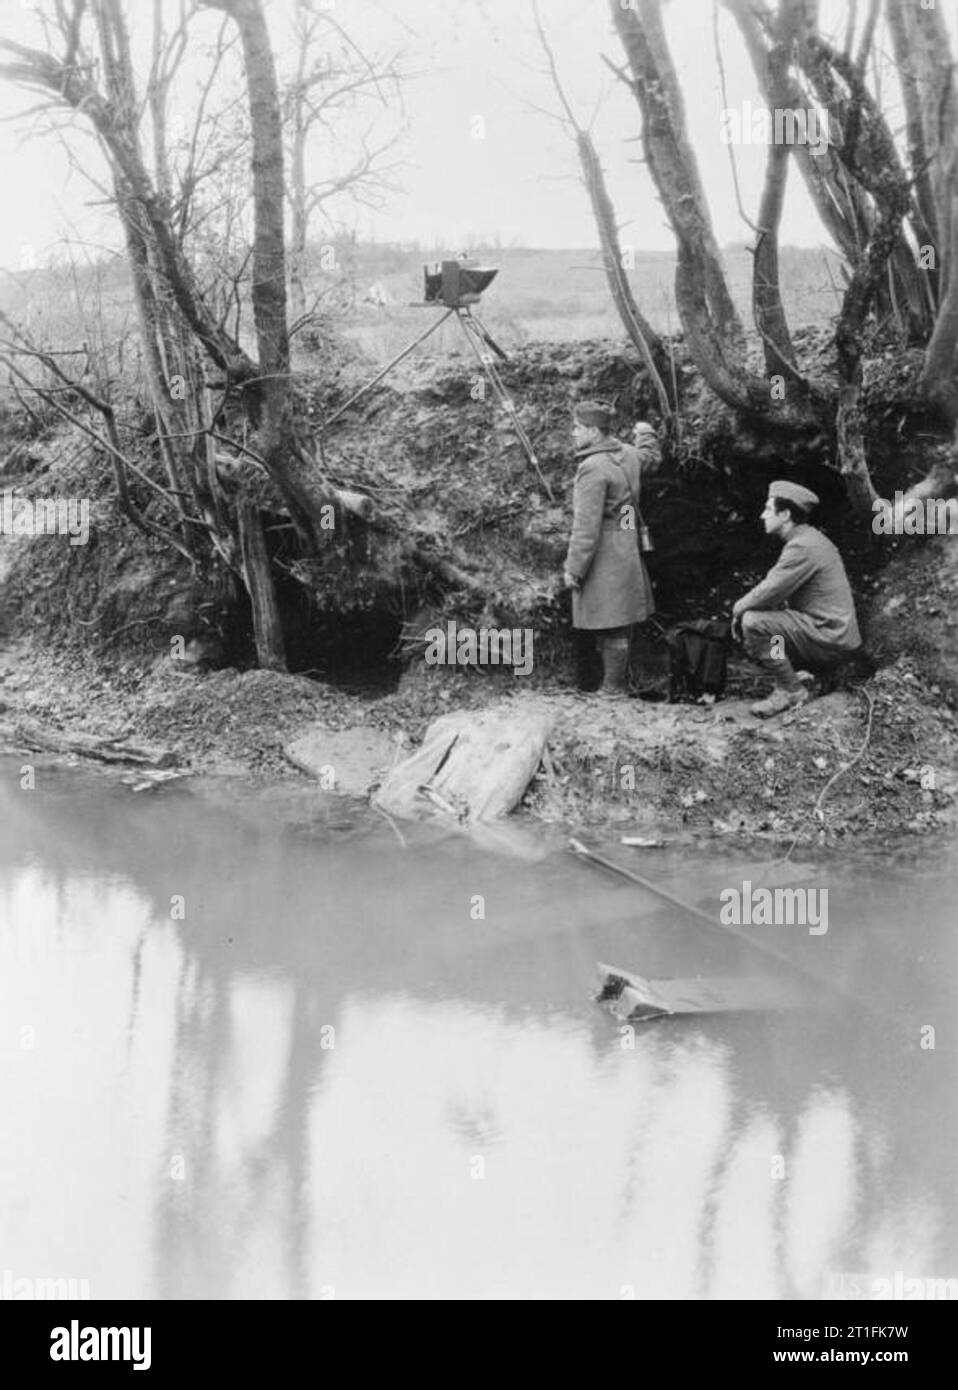 First World War Photographers An American official photographer of the US Signal Corps and his assistant carry out reconnaissance photography under cover of a deep river bank by the River Aire on the Western Front. They are using a glass plate camera mounted on a tripod to photograph the German lines. Stock Photo